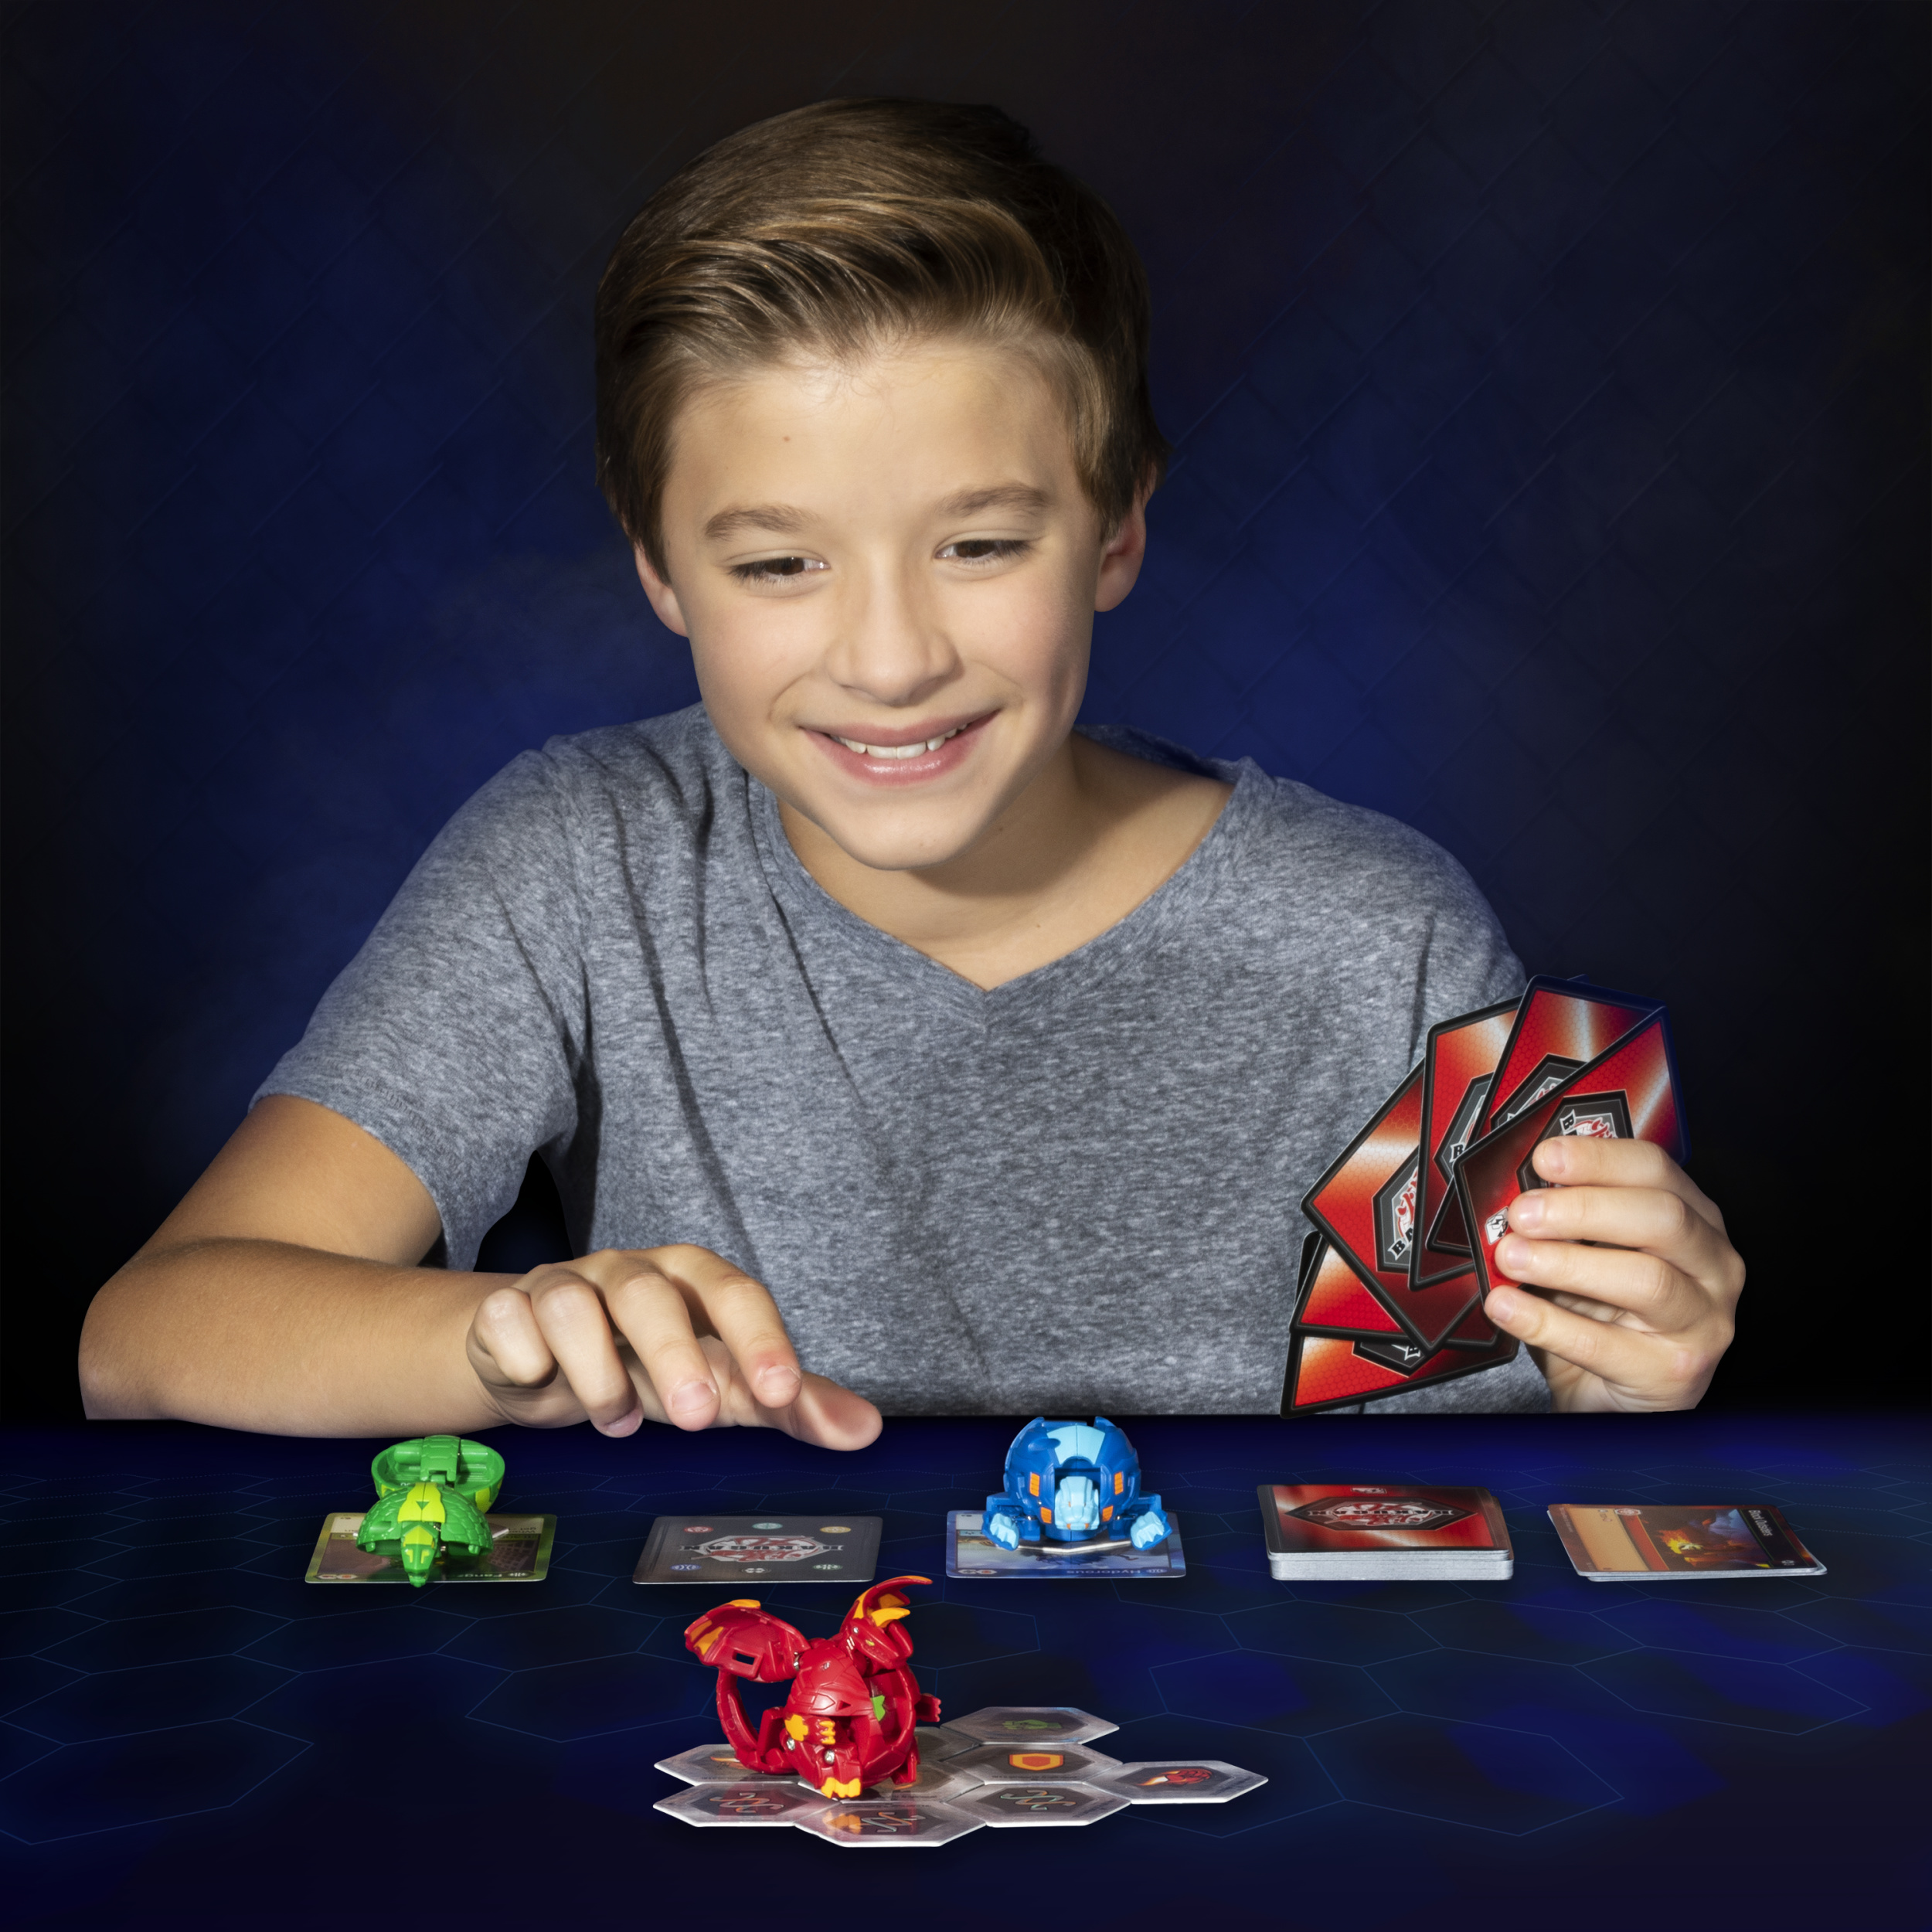 Bakugan, Ventus Fangzor, 2-inch Tall Collectible Action Figure and Trading Card, for Ages 6 and Up - image 5 of 5